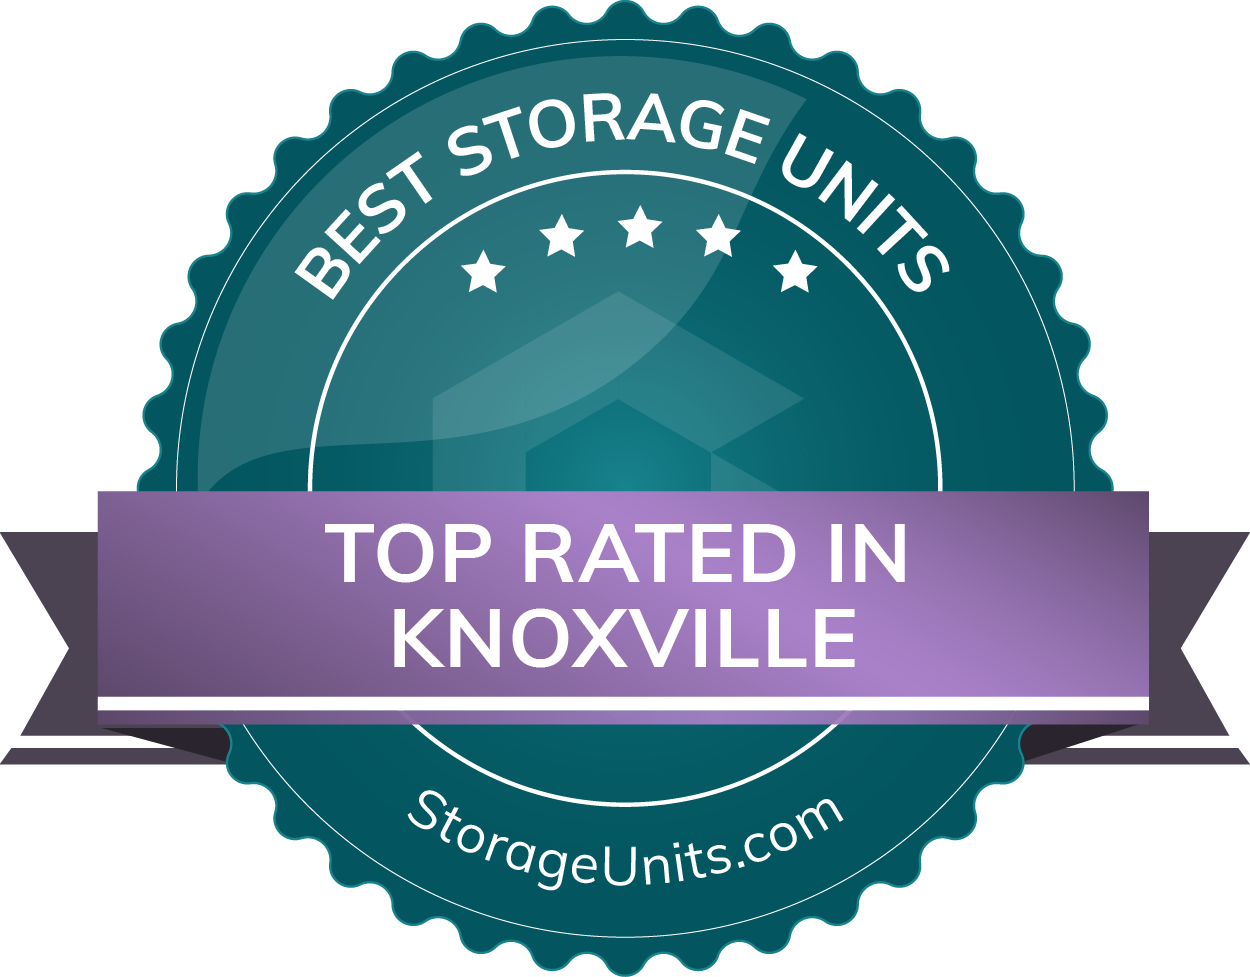 Best Self Storage Units in Knoxville, Tennessee of 2022